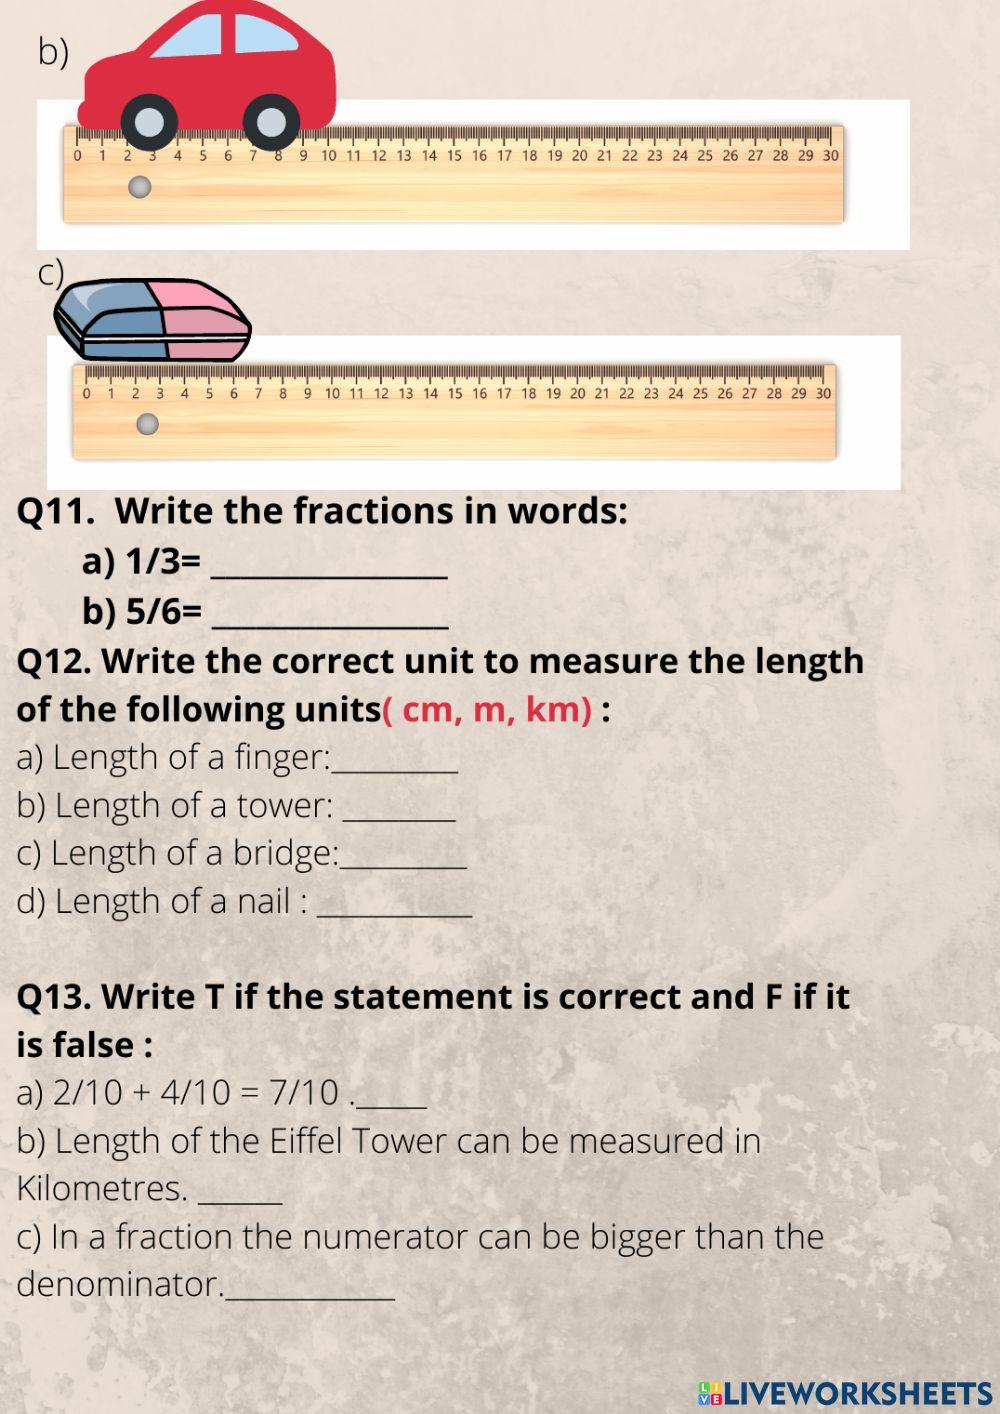 Fractions and Length